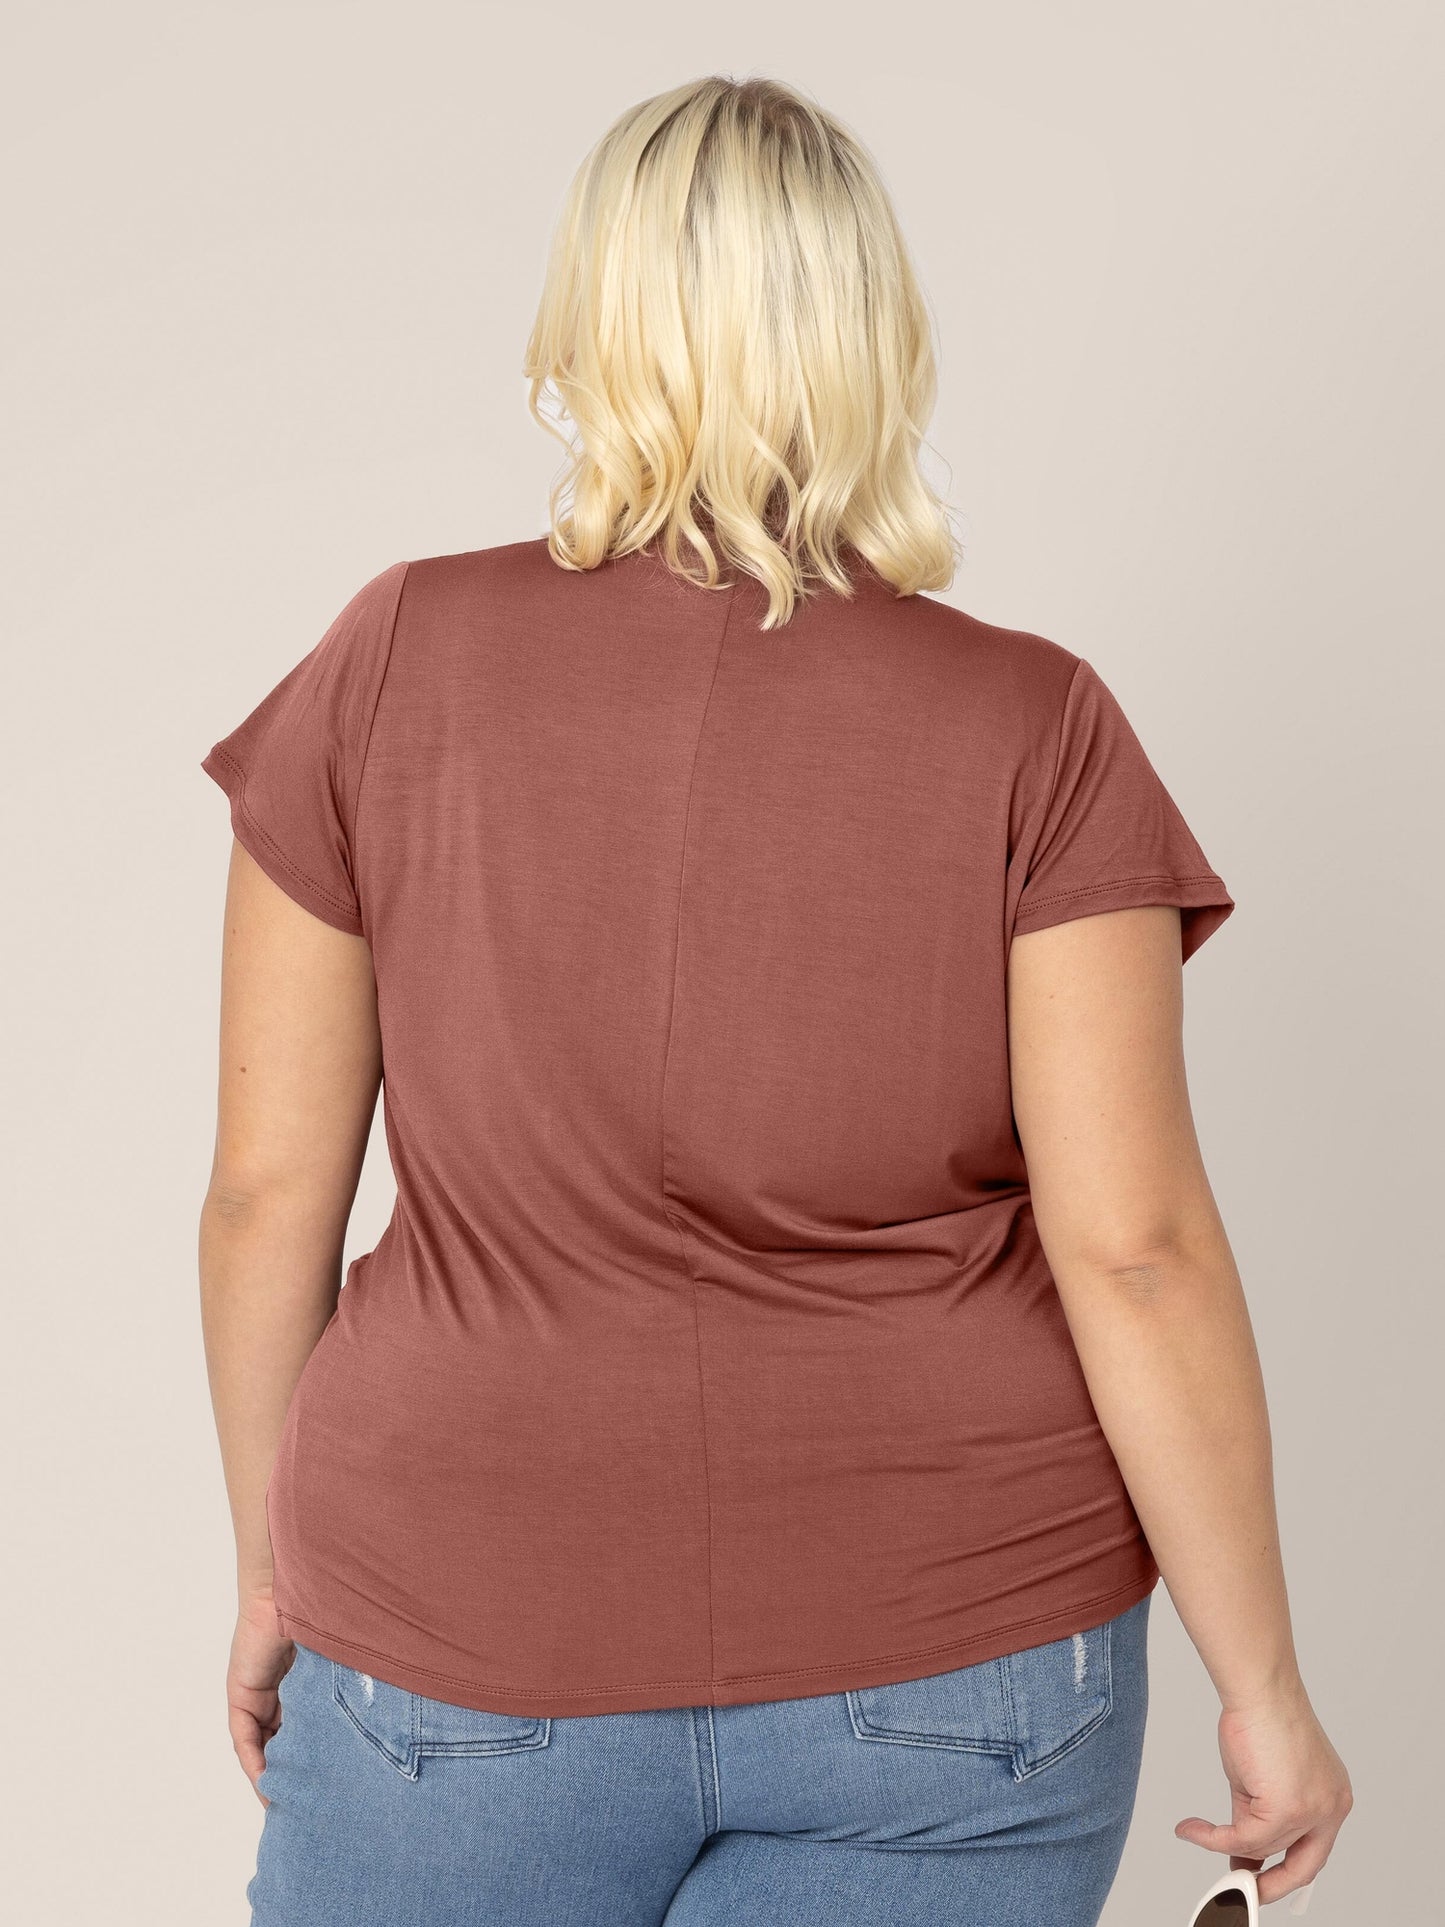 Back view of model wearing the Bamboo Draped Nursing Top in redwood